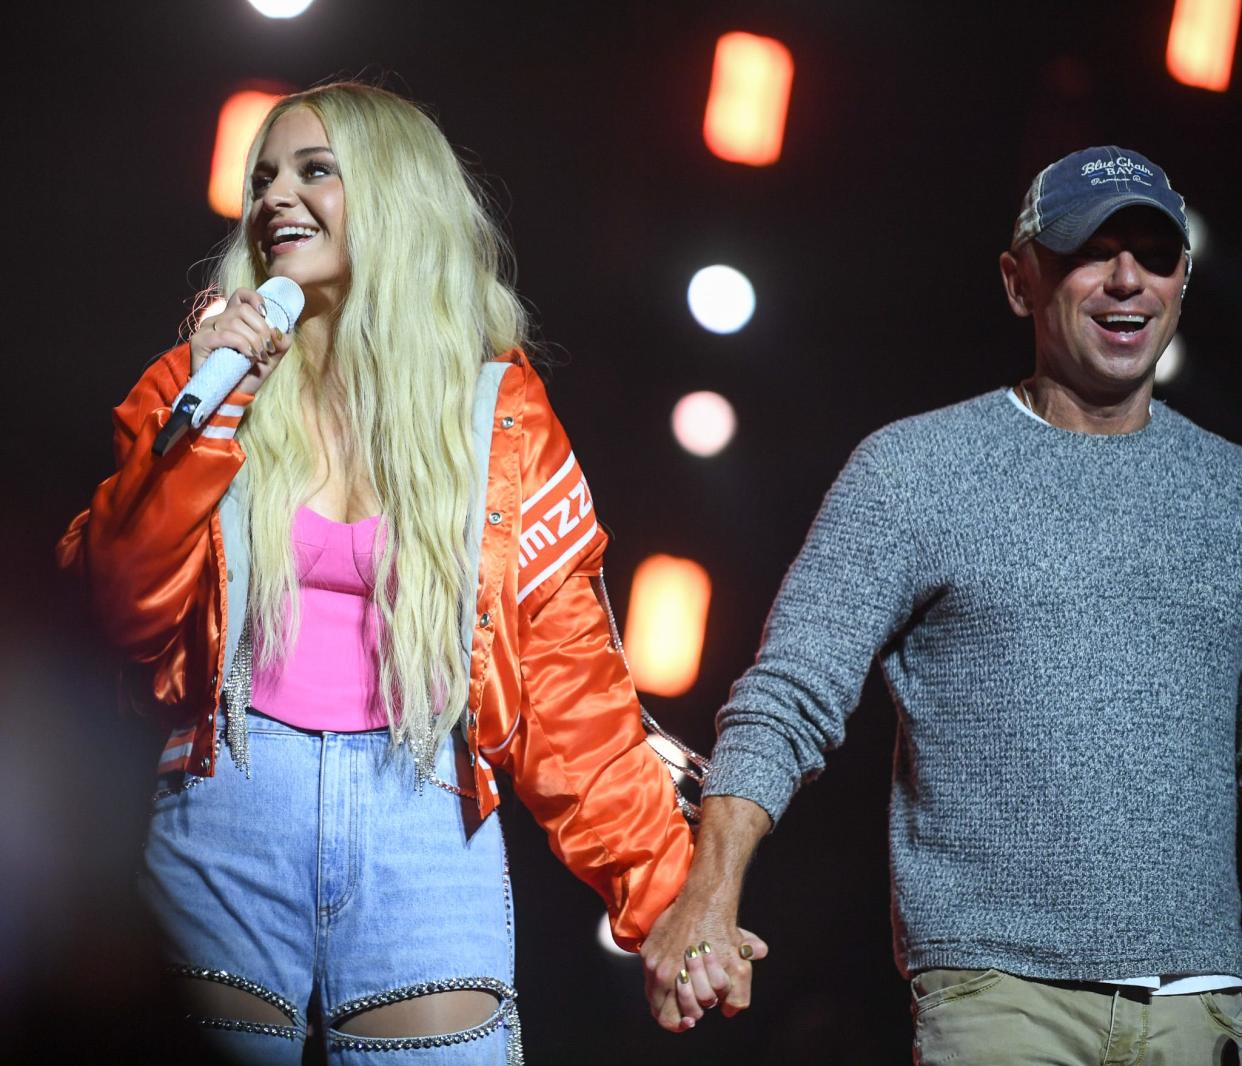 This award was an easy one to give. Knoxville native and country music star Kelsea Ballerini (pictured on stage with another Scruffy City native Kenny Chesney) wins the "Best Knoxville homecoming" award for November's showstopping performance at Thompson-Boling Arena at Food City Center.